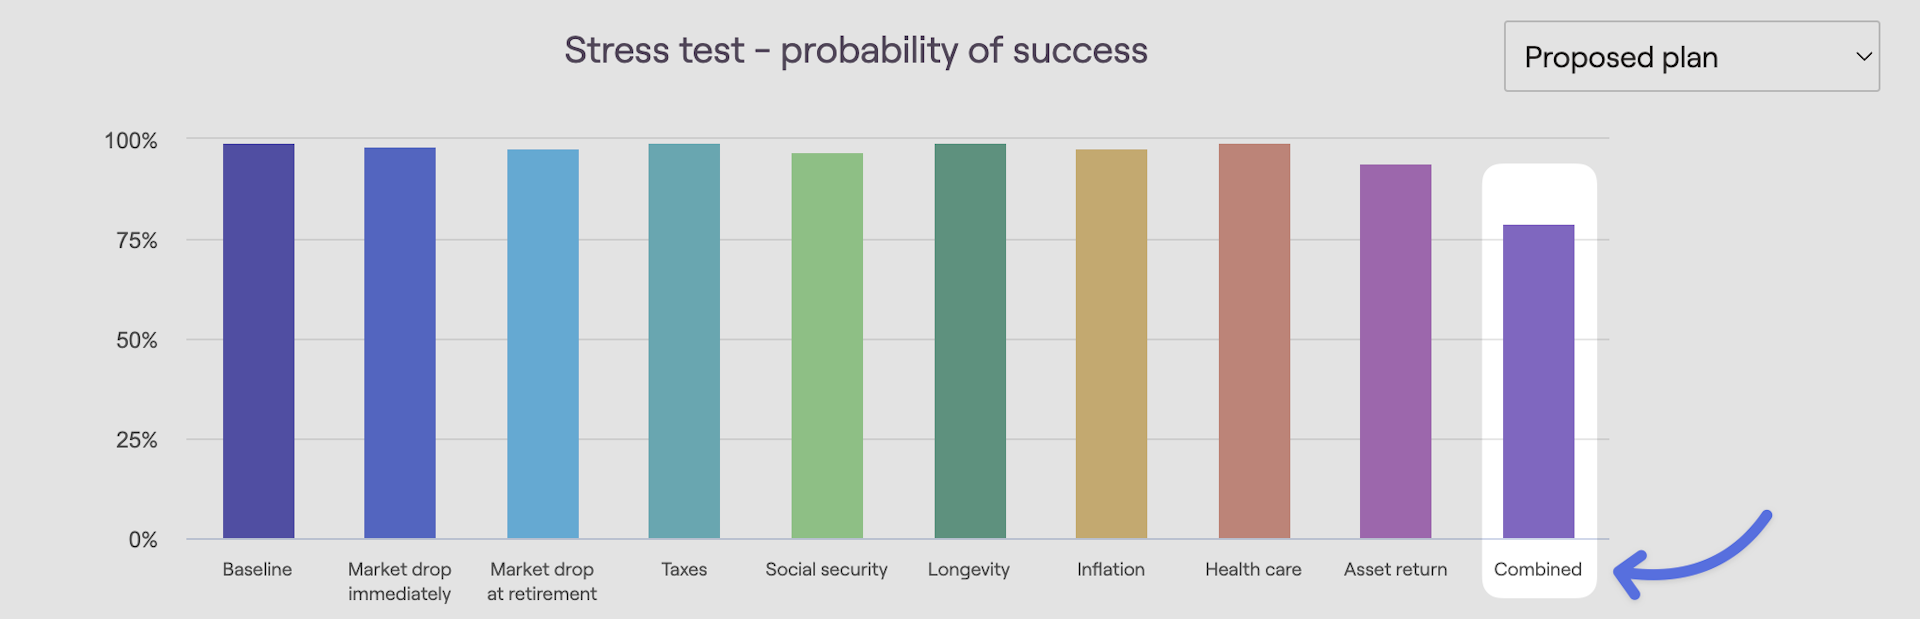 Screenshot showing Stress test probability of success with Combined column example